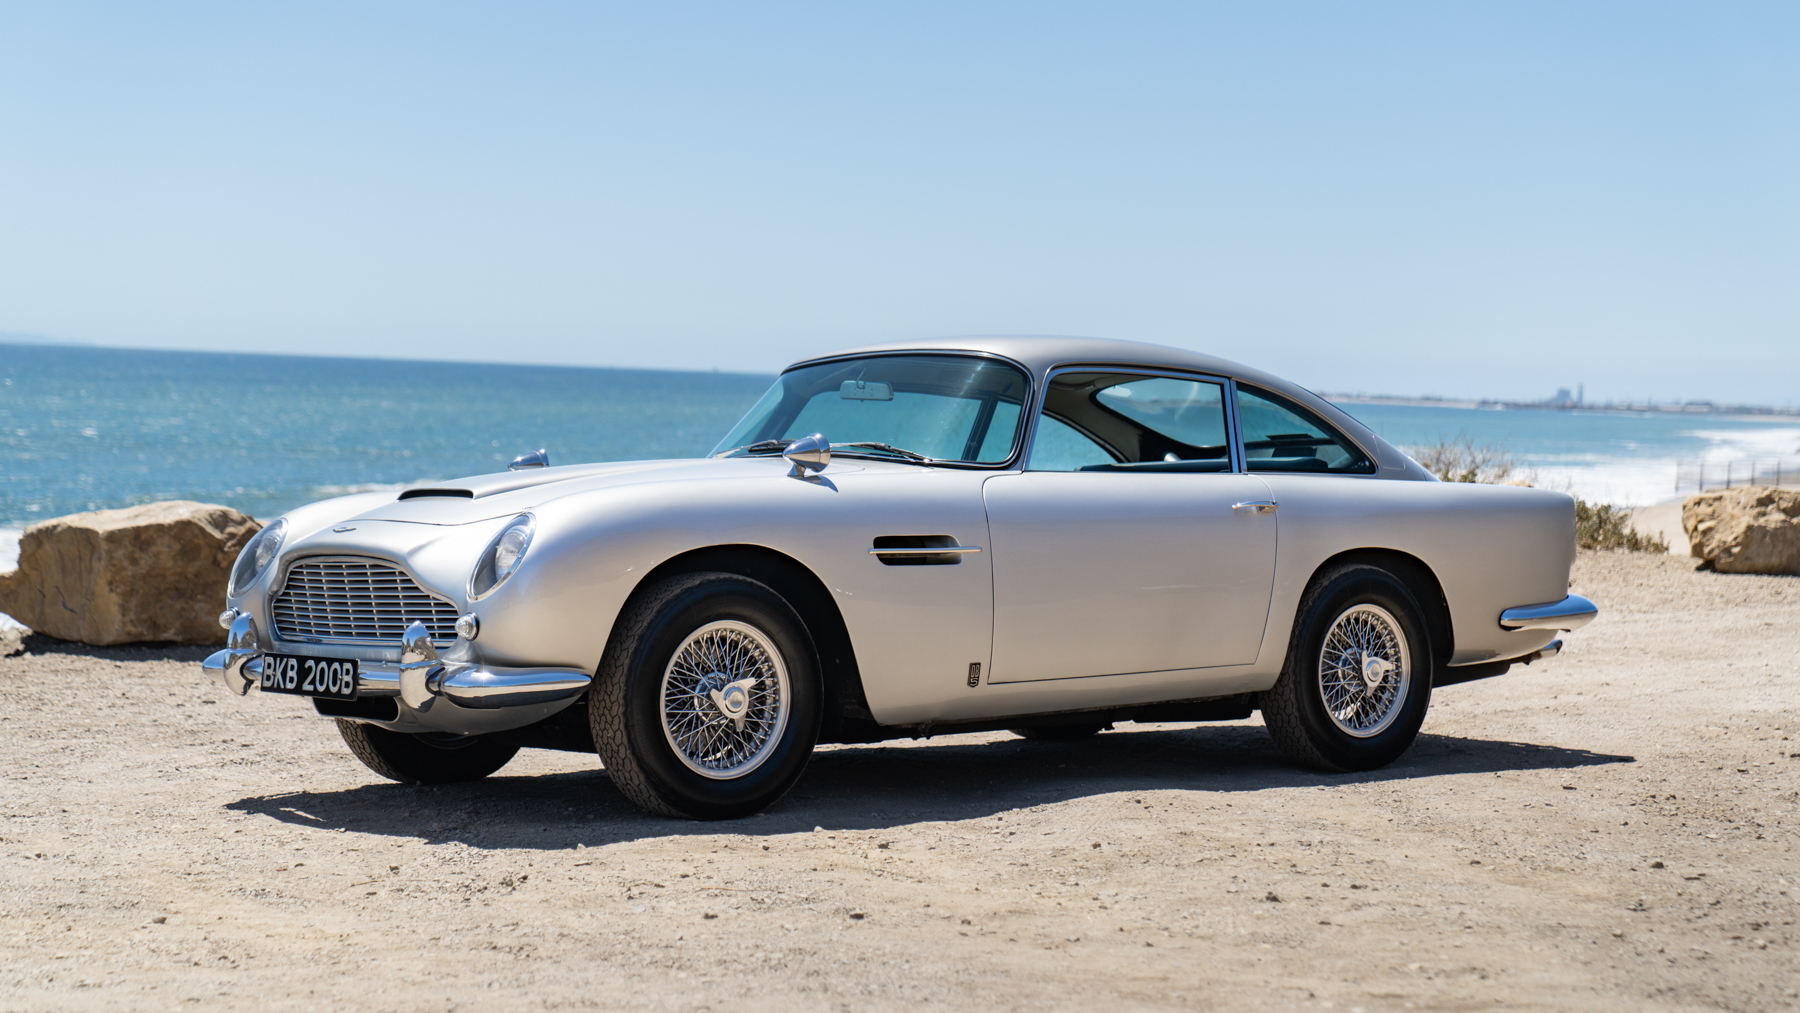 Neil Peart's 1964 Aston Martin DB5, image courtesy of Gooding & Company. Photo by Mike Maez.